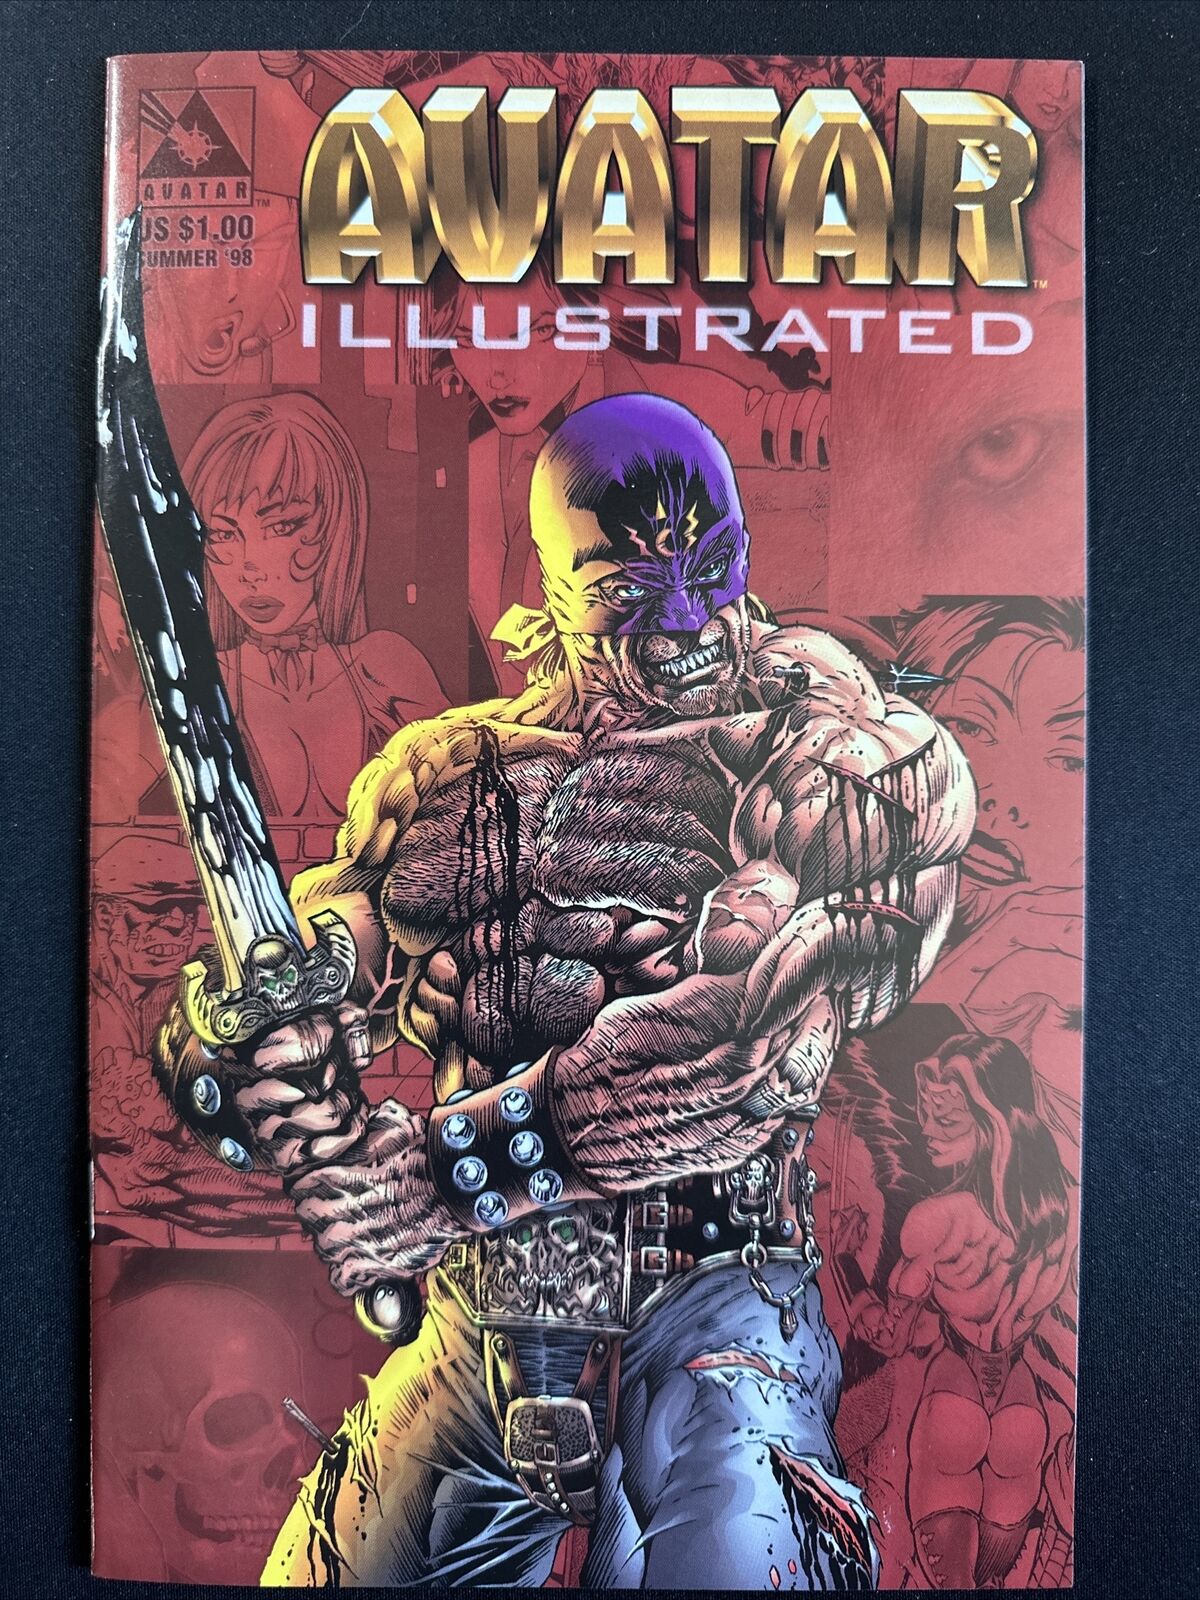 Avatar Illustrated #1 Summer 98 Early The Goon Appearance 1998 VF/NM